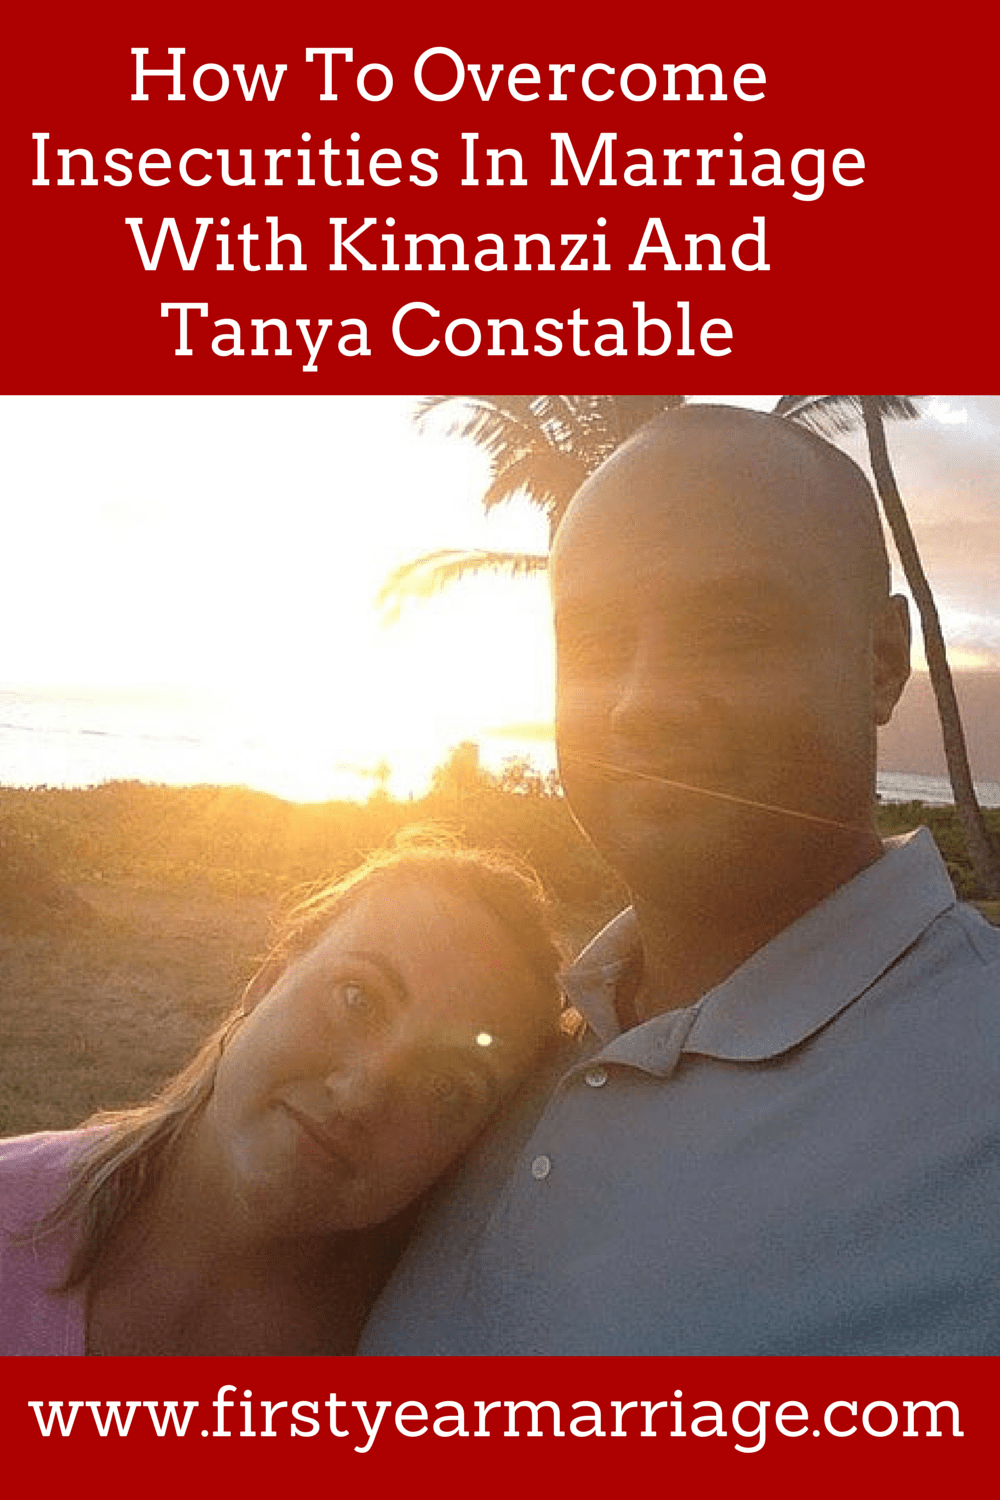 How To Overcome Insecurities In Marriage With Kimanzi And Tanya Constable